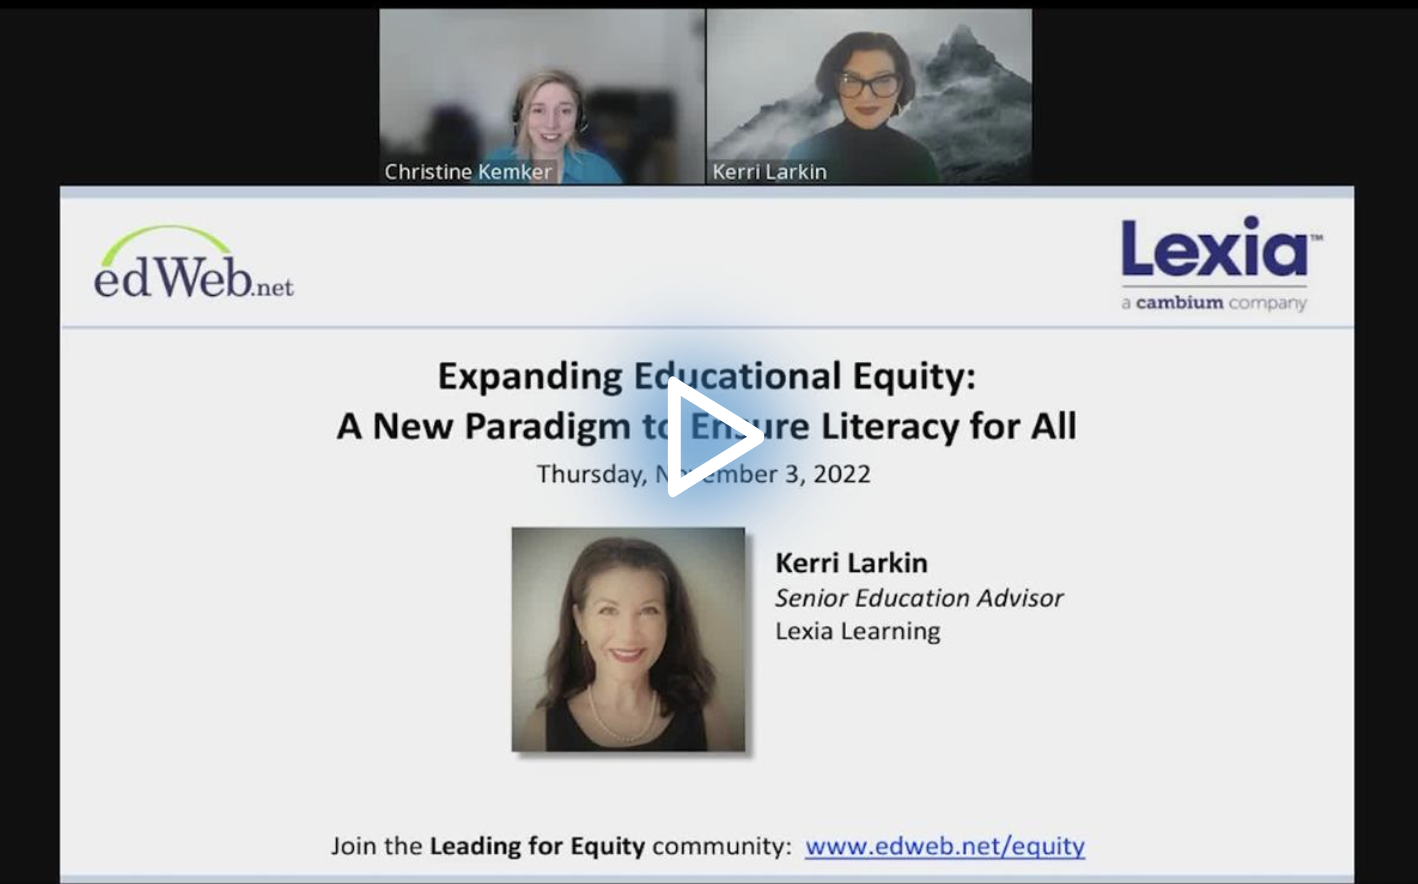 Expanding Educational Equity: A New Paradigm to Ensure Literacy for All edLeader Panel recording screenshot